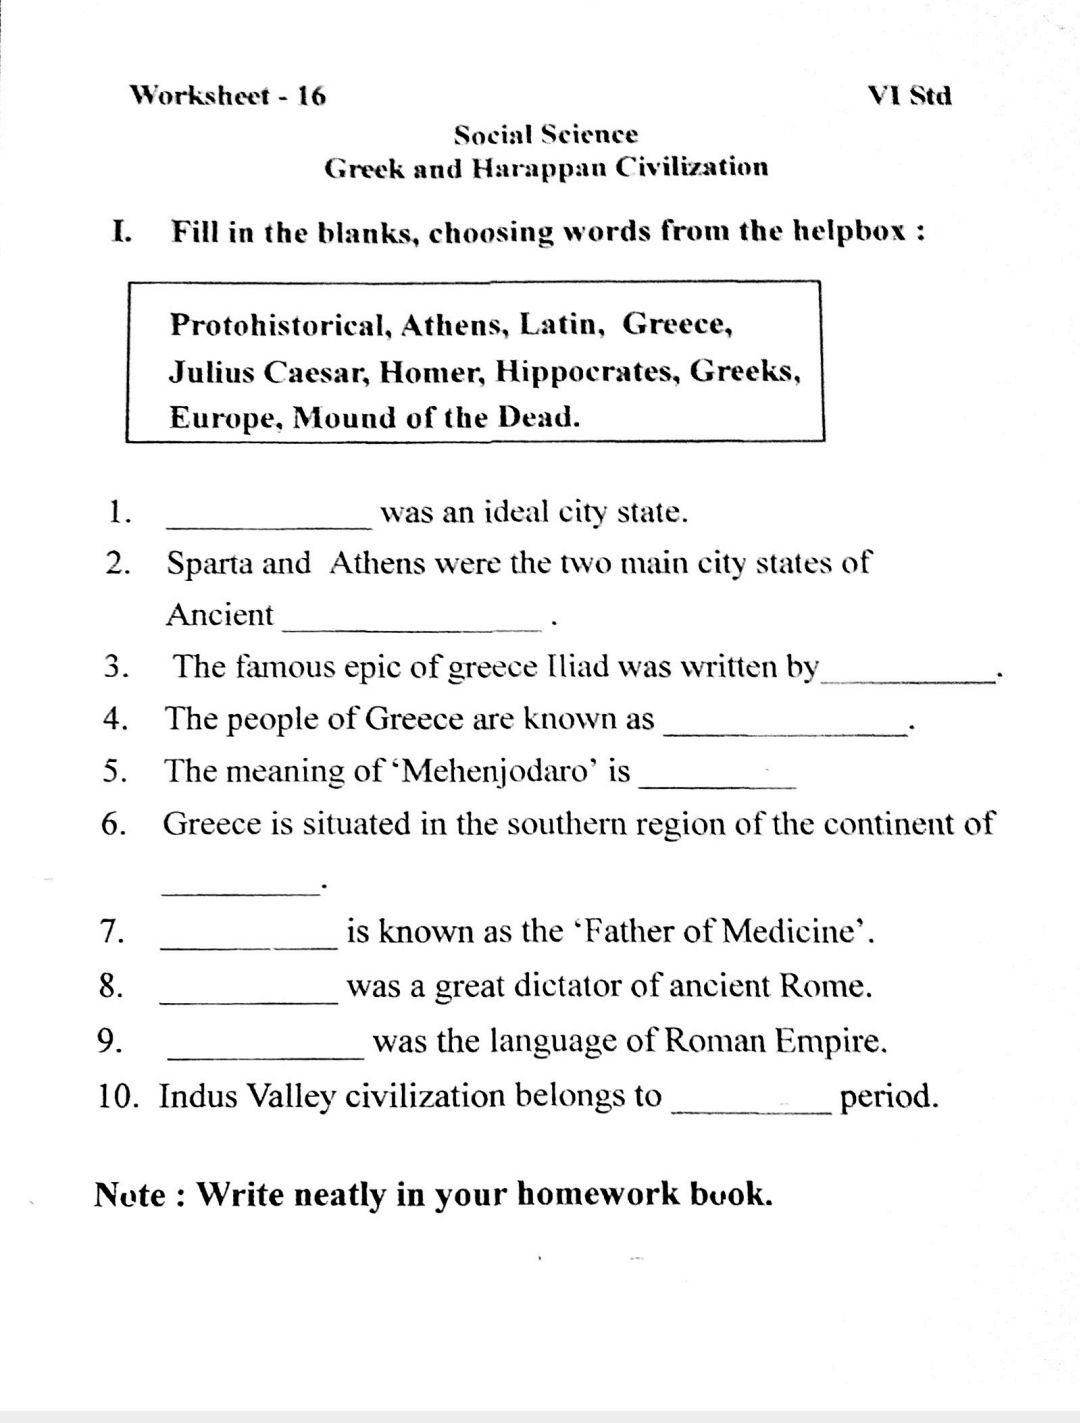 Worksheet -21 - Social Science - Assignment - Teachmint In The Language Of Science Worksheet